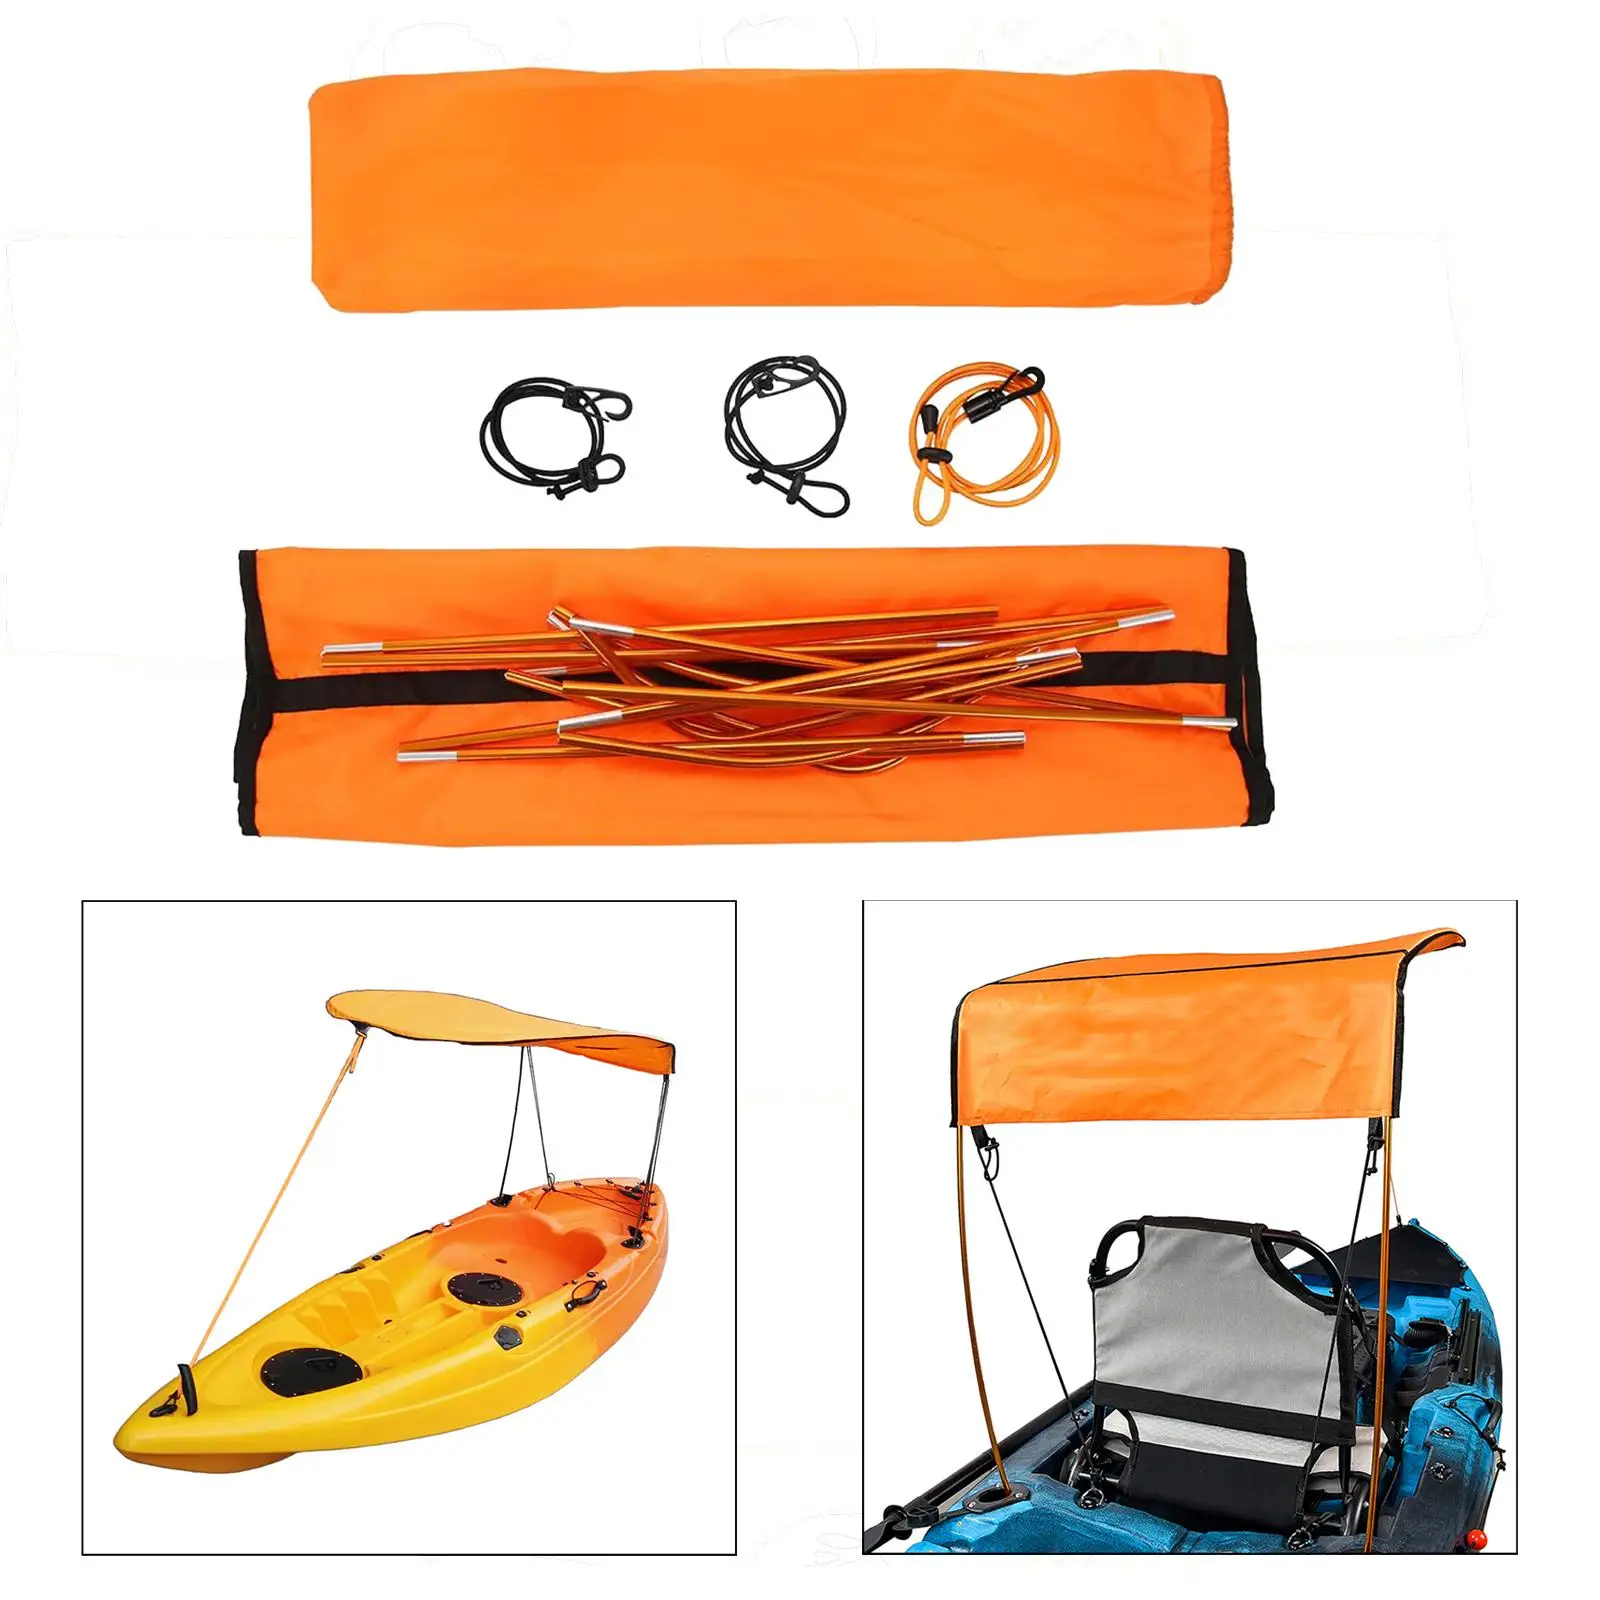 Rainproof Kayak Boat Awning Canopy for Water Sports Sailboat